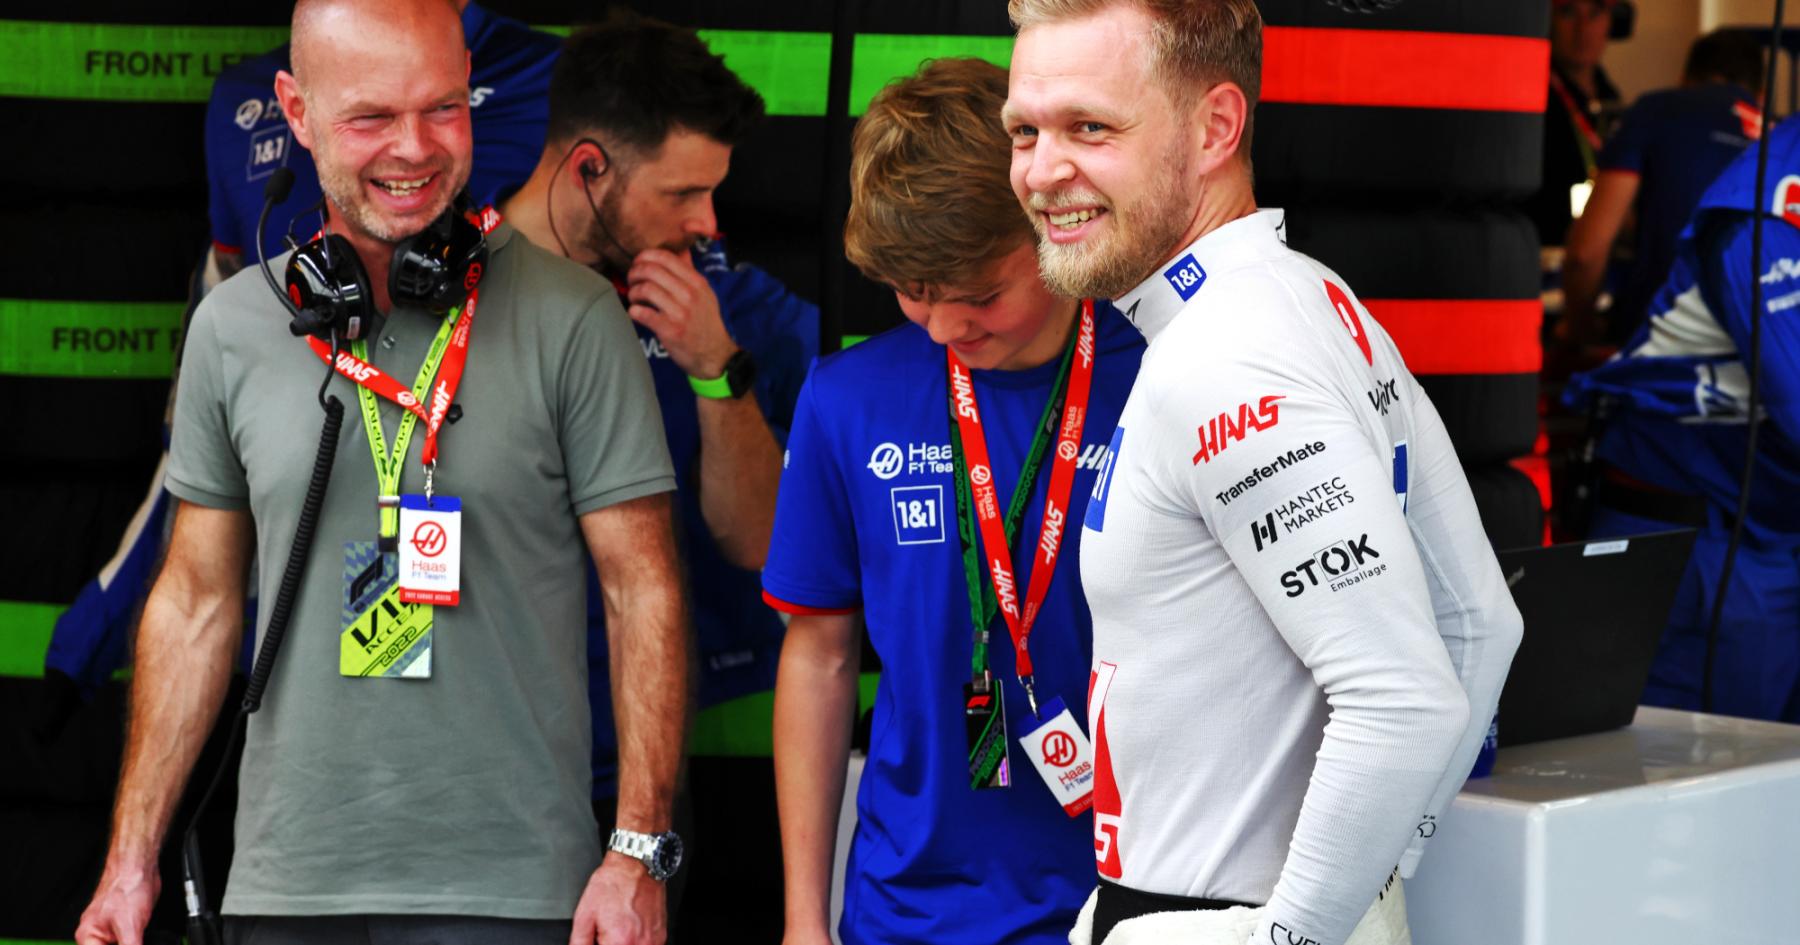 Family Ties: A Revealing Look at the Racing Legacy of Magnussen's Father in F1